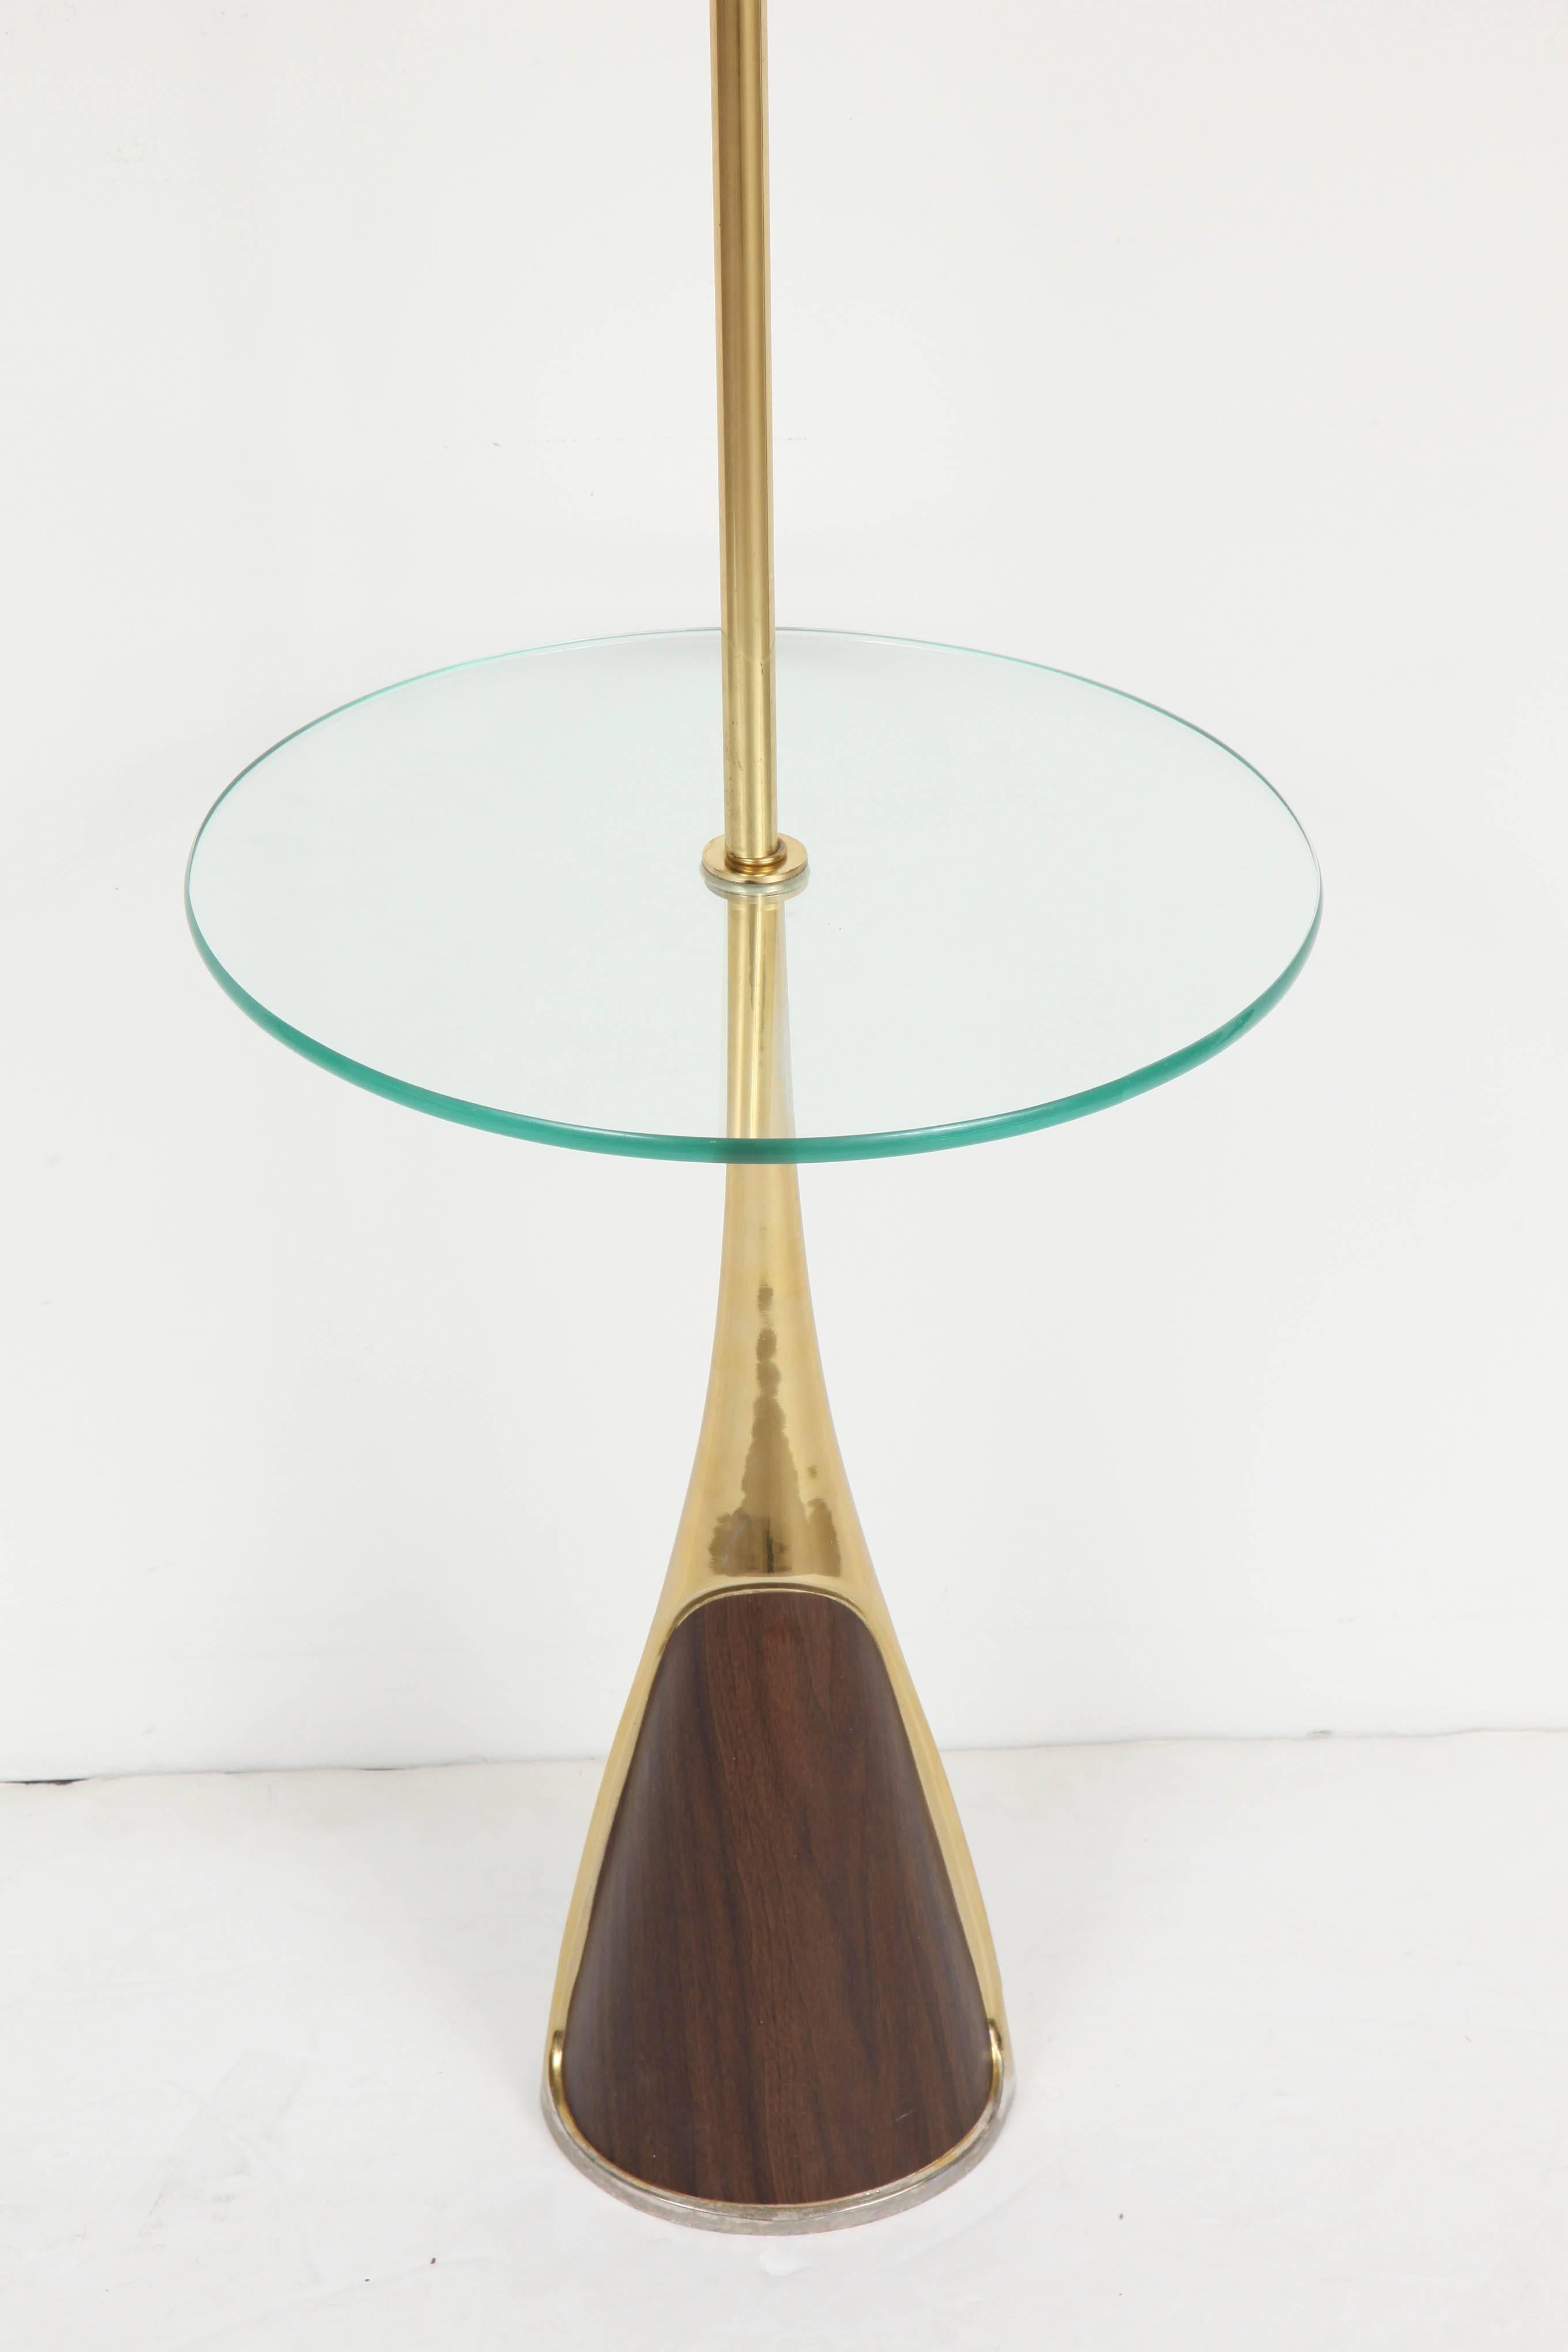 A floor lamp with round glass table shelf by Laurel. USA, circa 1950.  Features a polished brass and wood veneer base supporting a glass shelf; complemented by an off-white paper drum shade and original finial.  

Takes a standard bulb, 100 watts